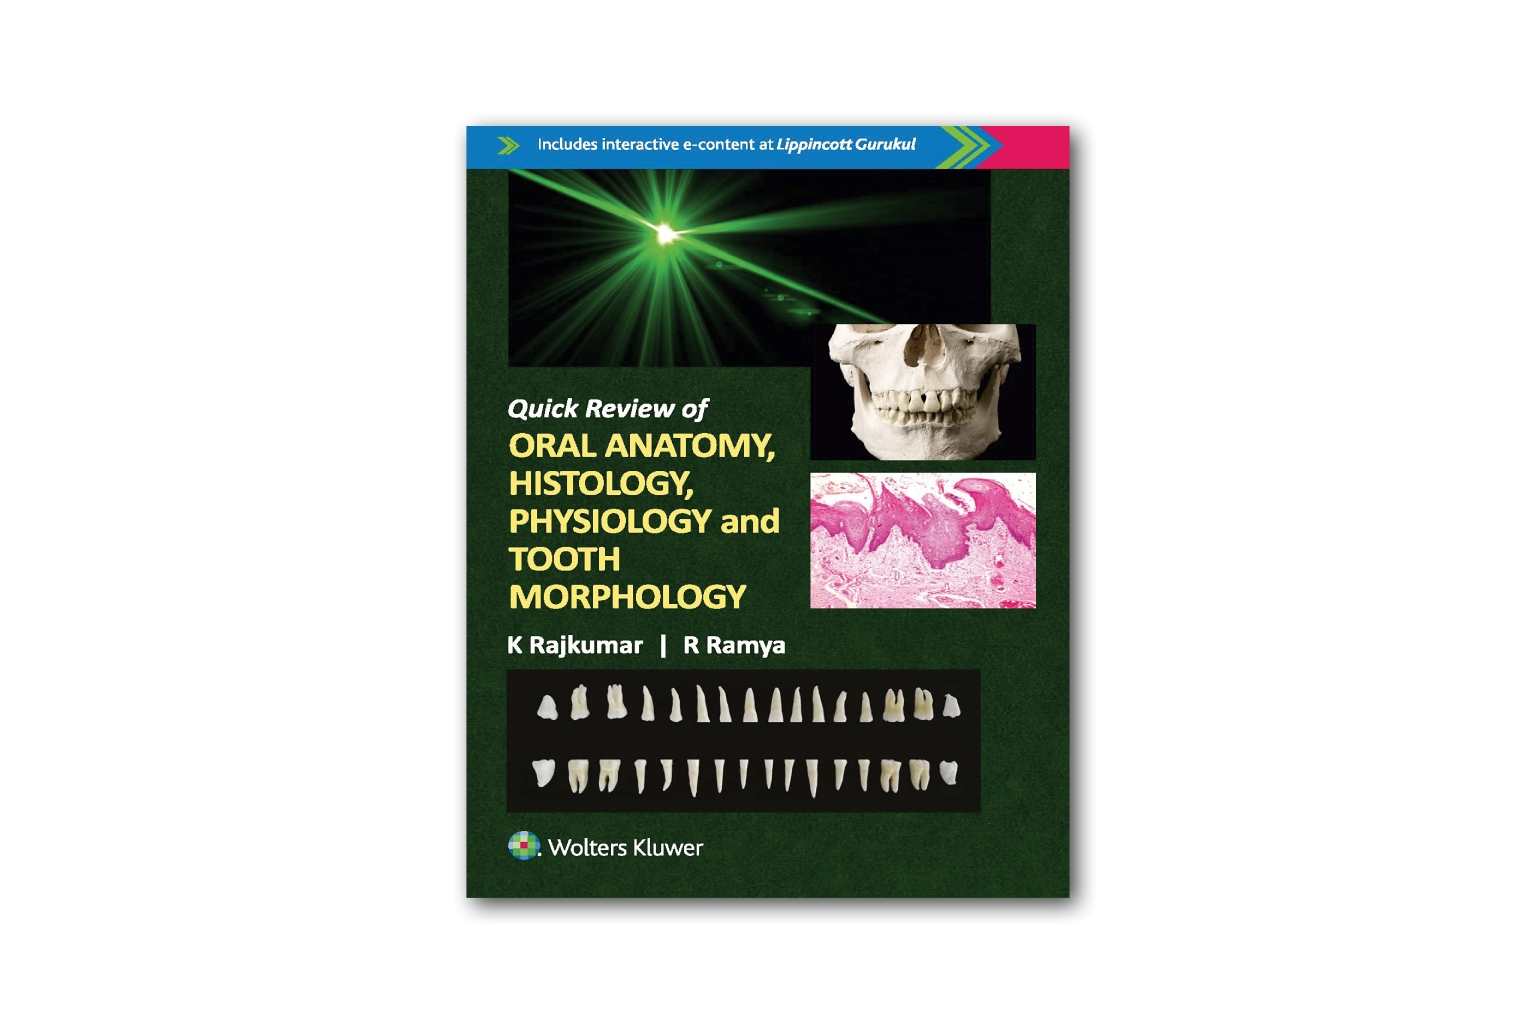 Quick Review of Oral Anatomy, Histology and Tooth Morphology e-content cover